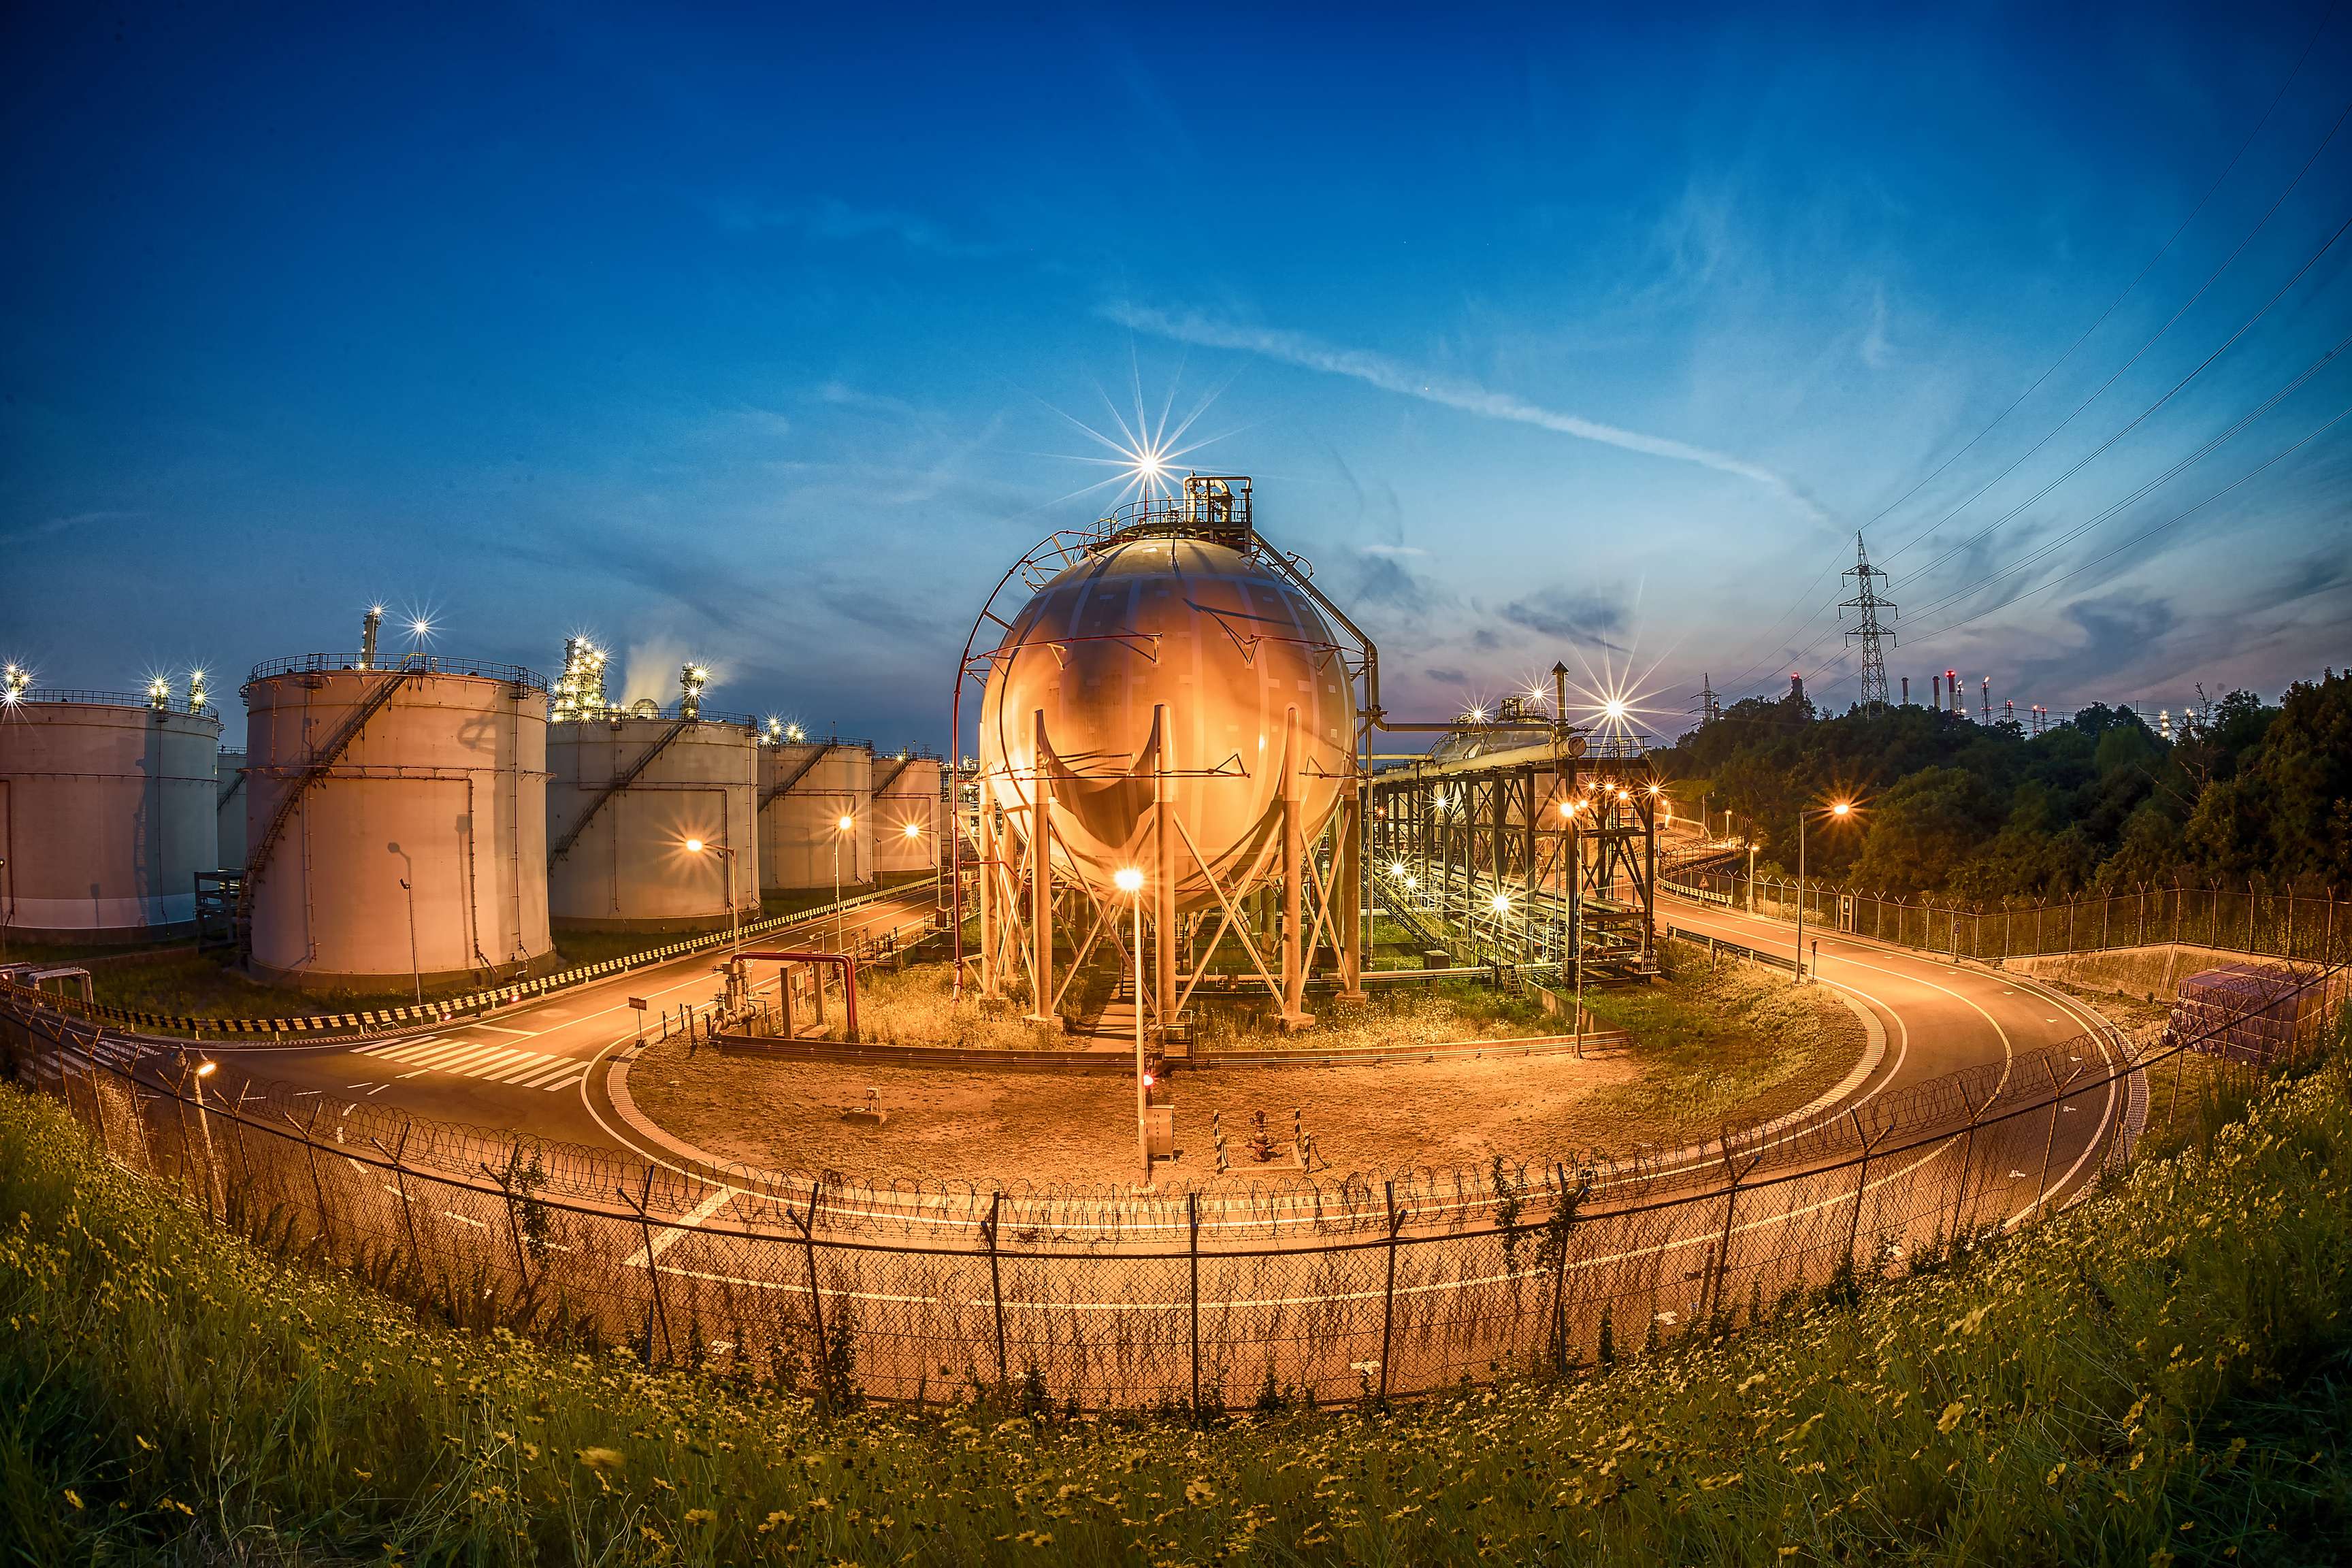 Pressure vessels at dusk next to a tank farm with city lights in the background.